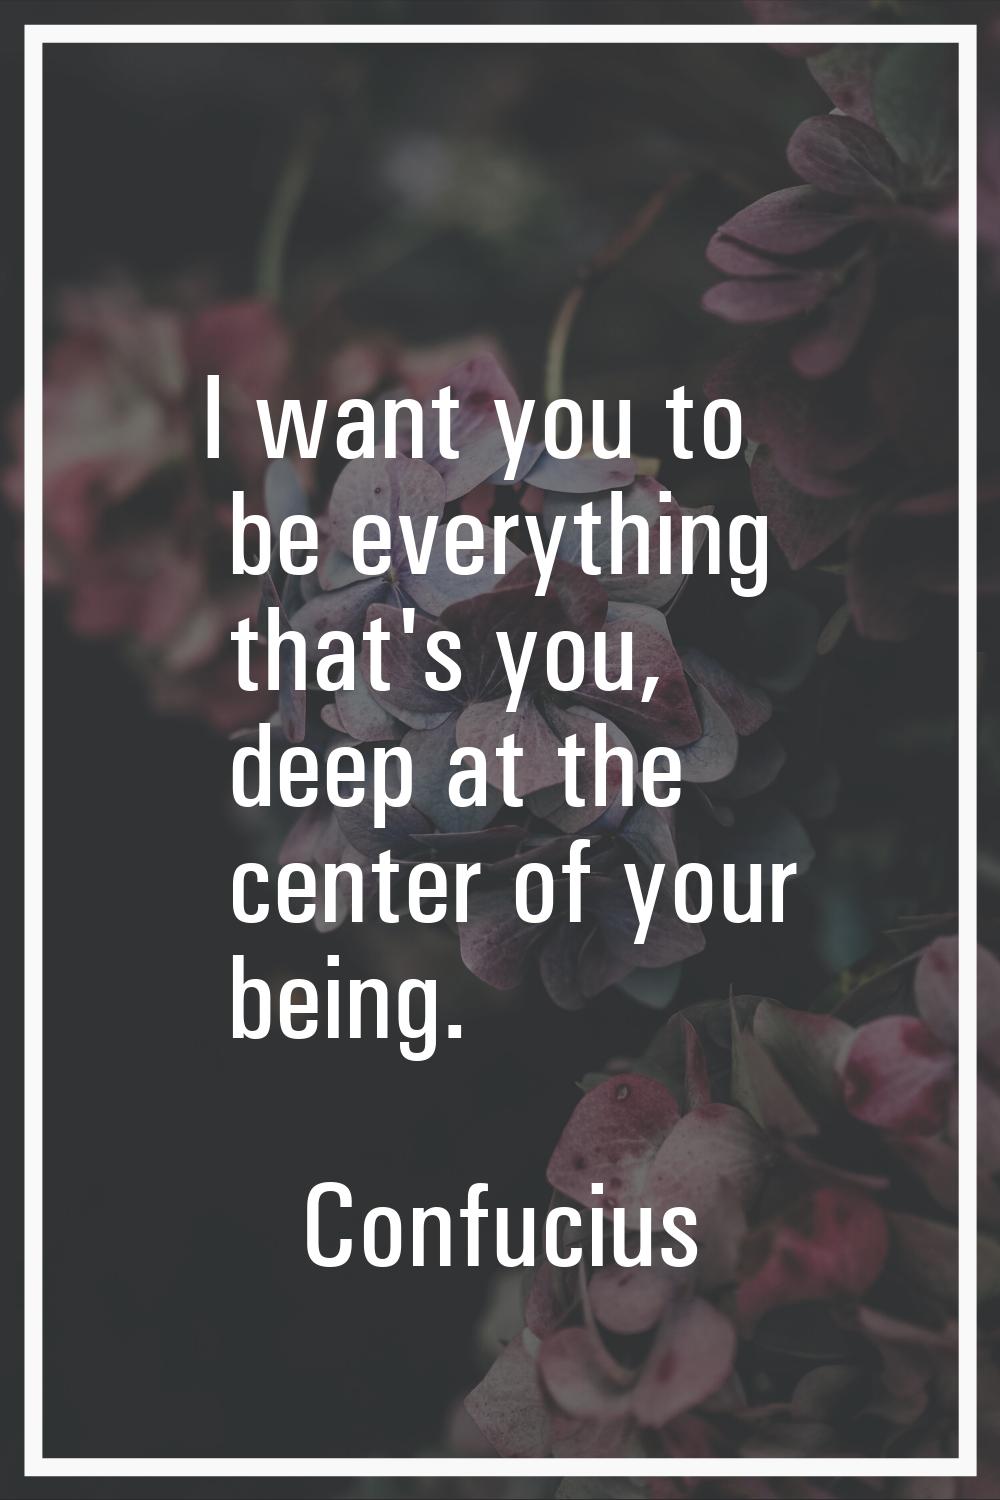 I want you to be everything that's you, deep at the center of your being.